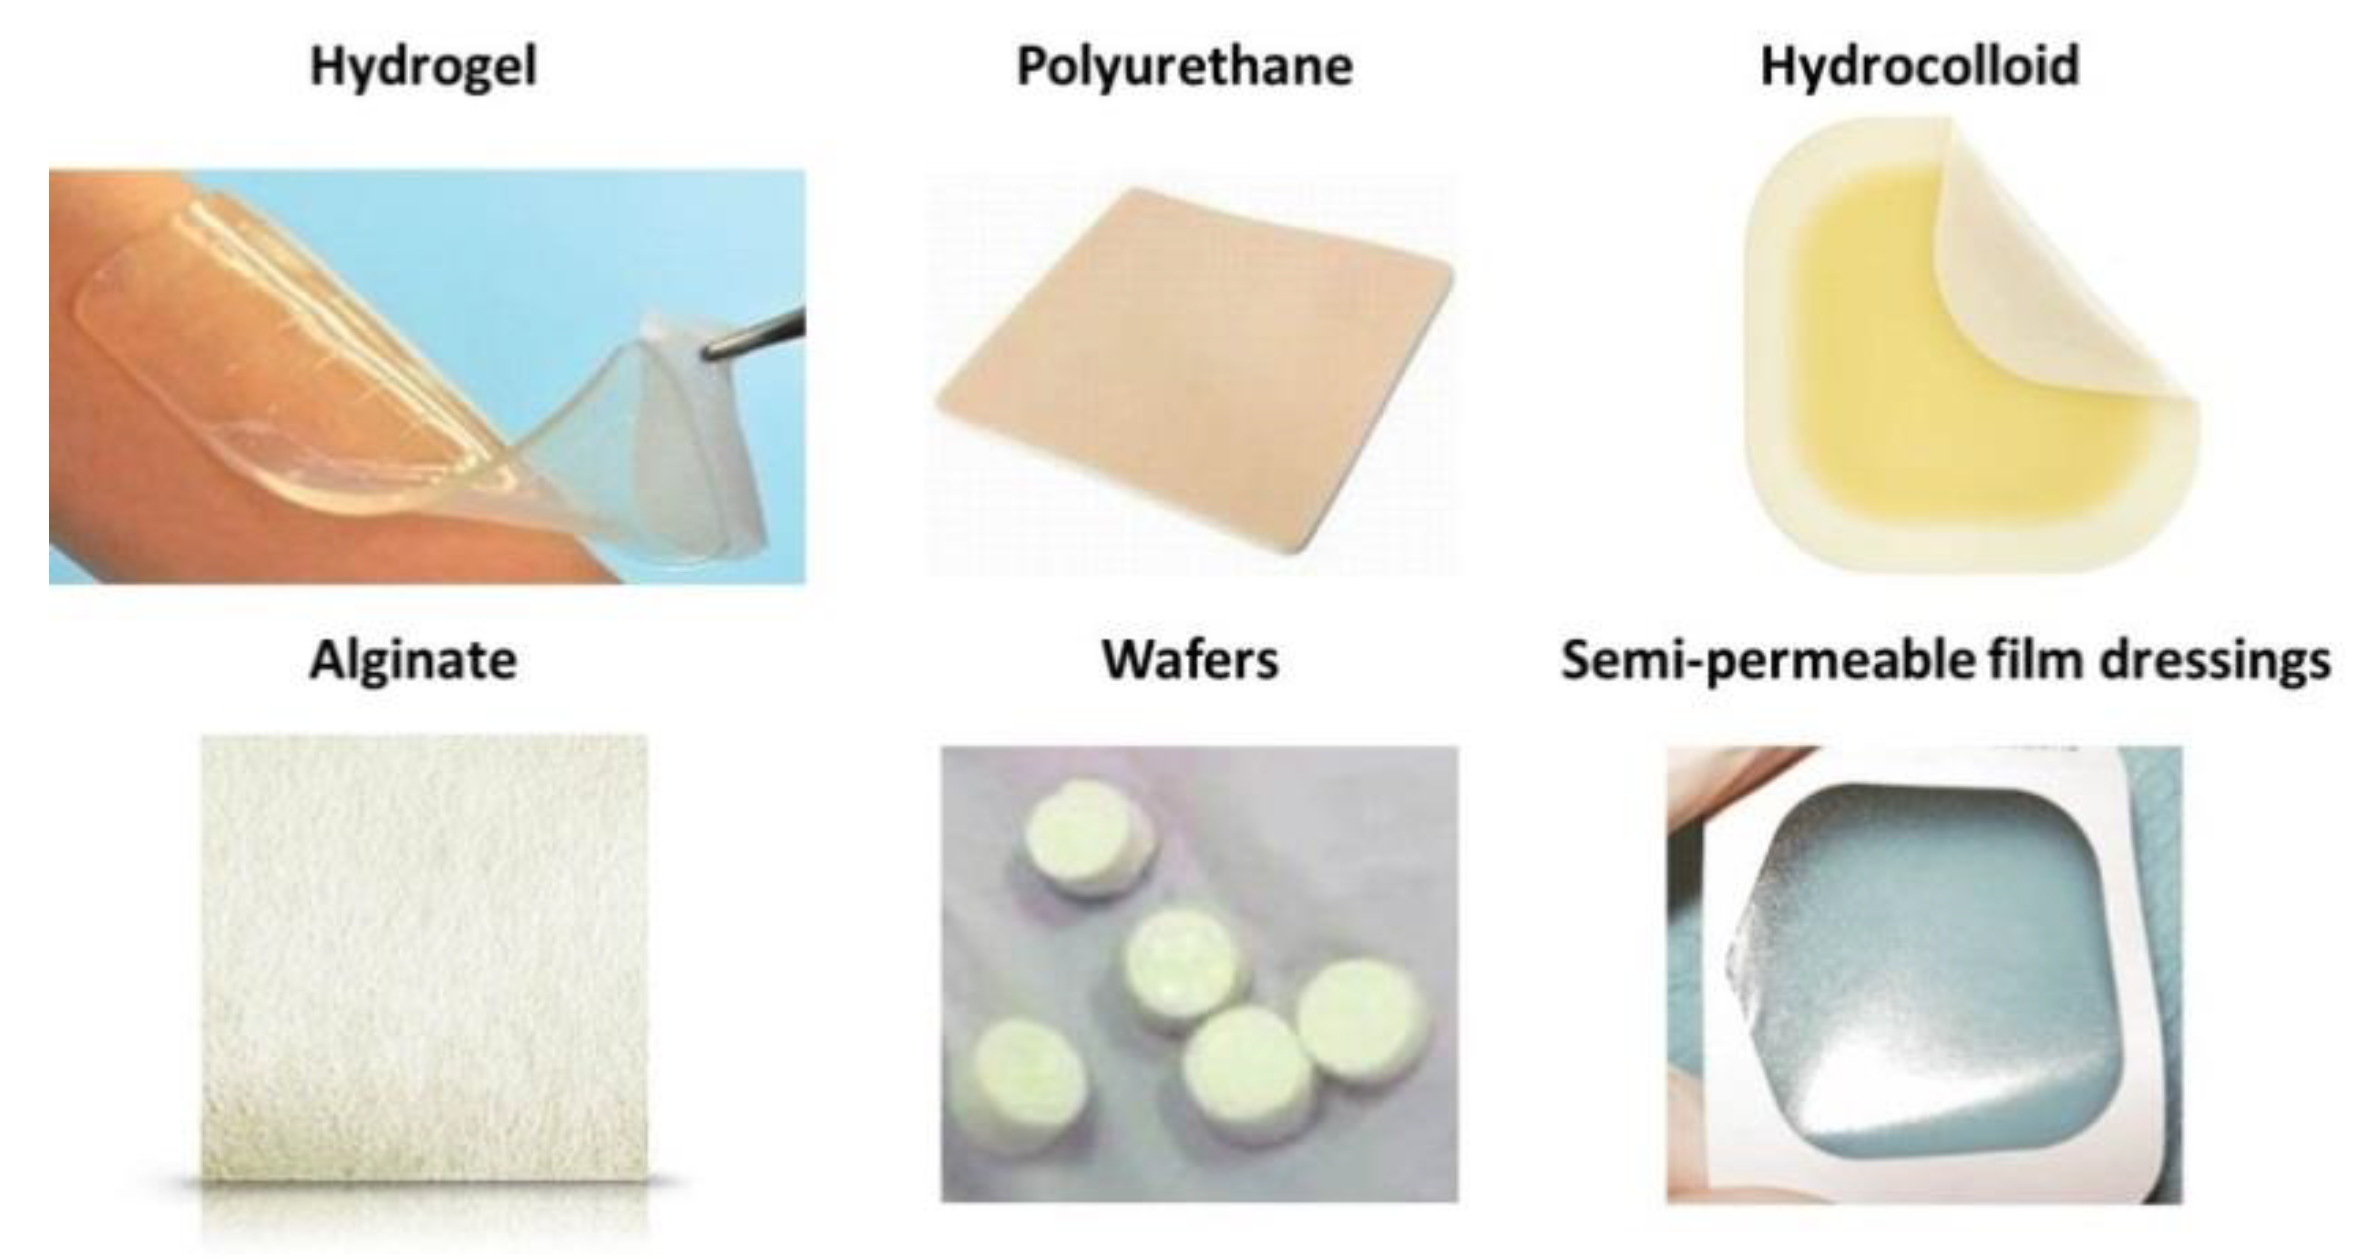 wound care dressing categories